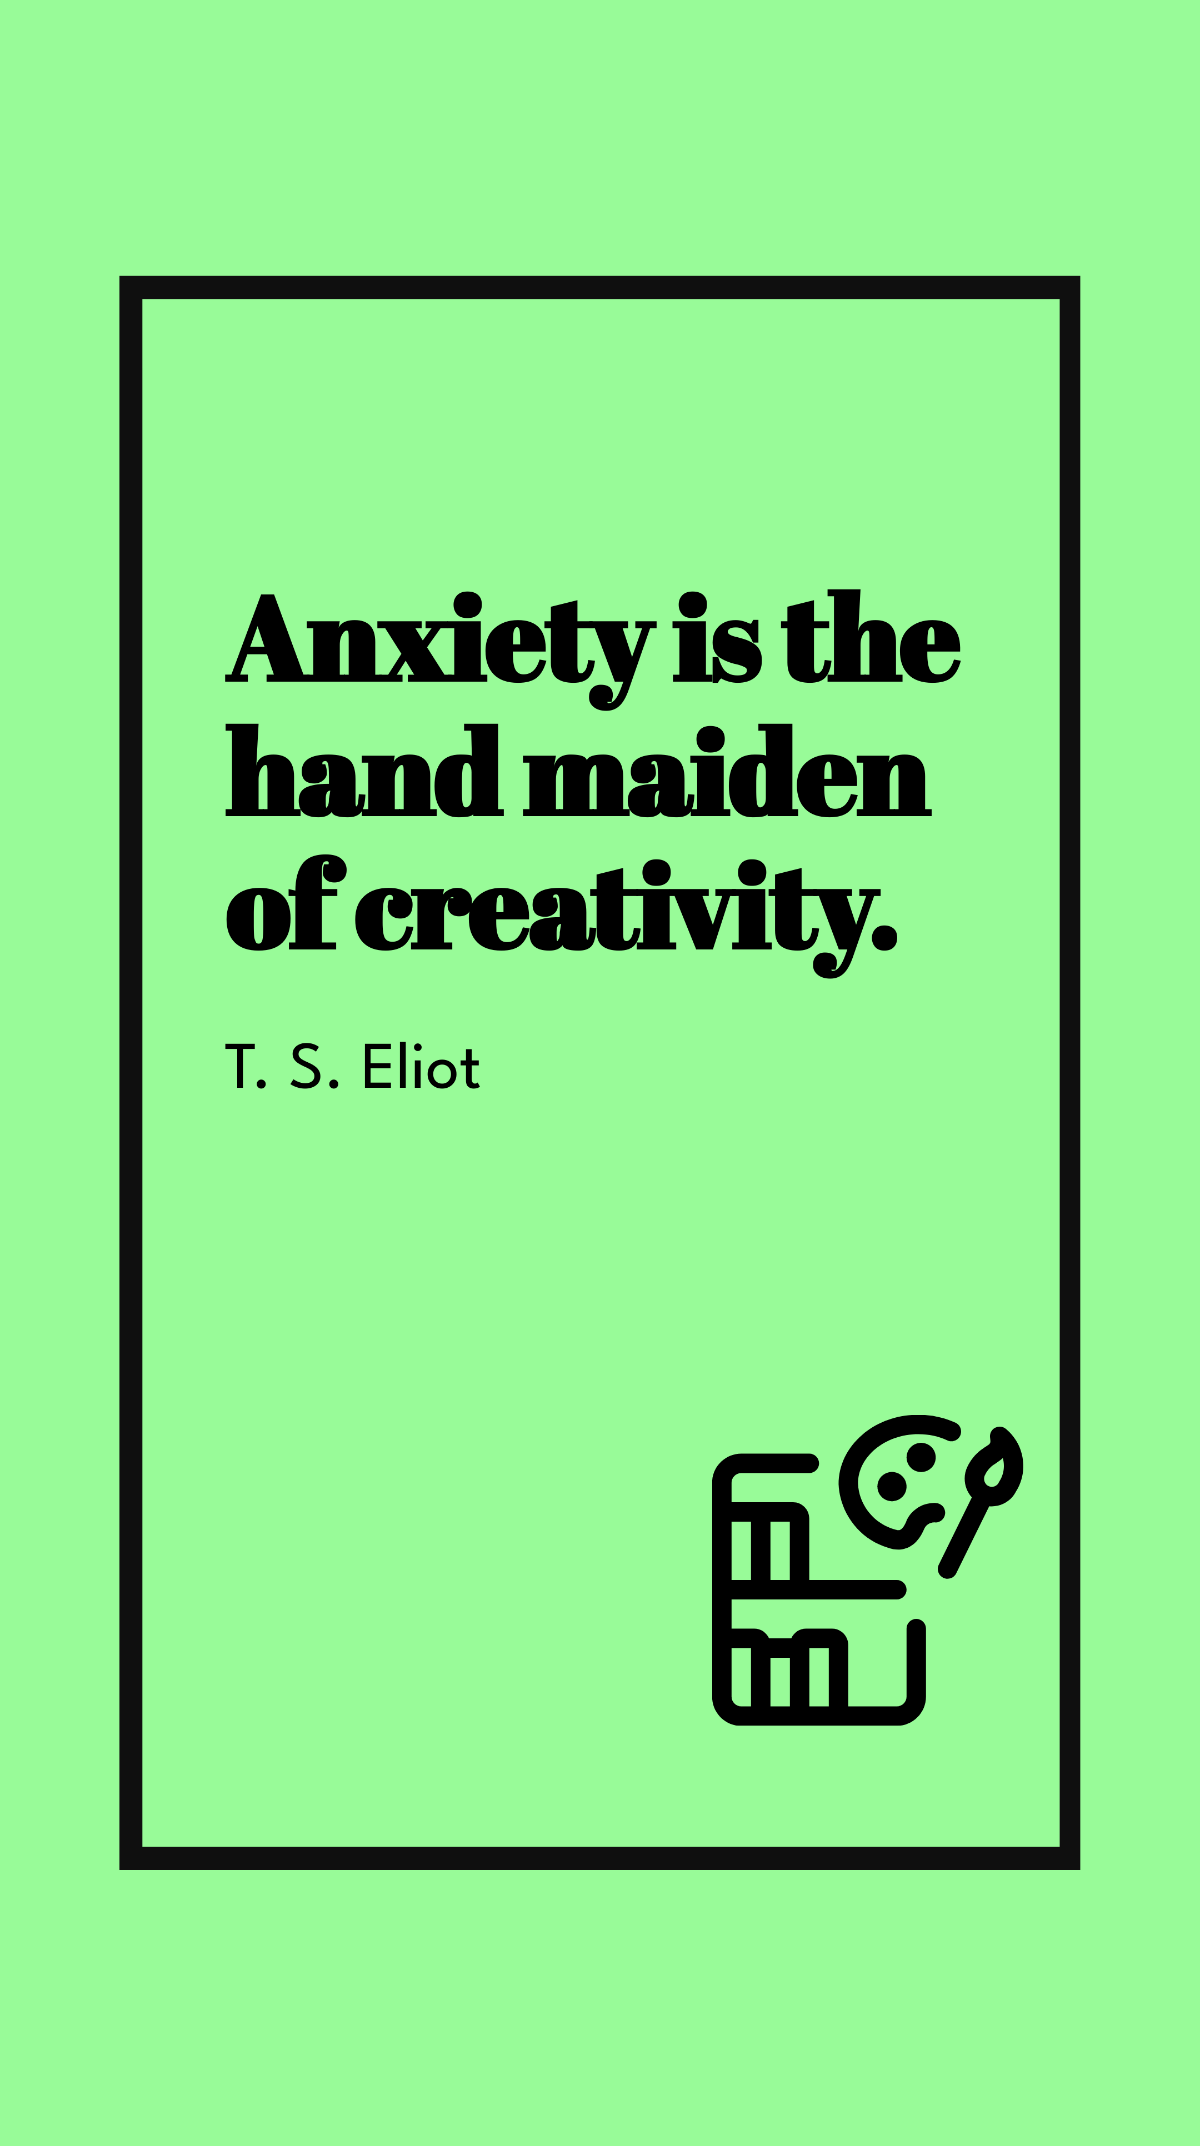 T. S. Eliot - Anxiety is the hand maiden of creativity.